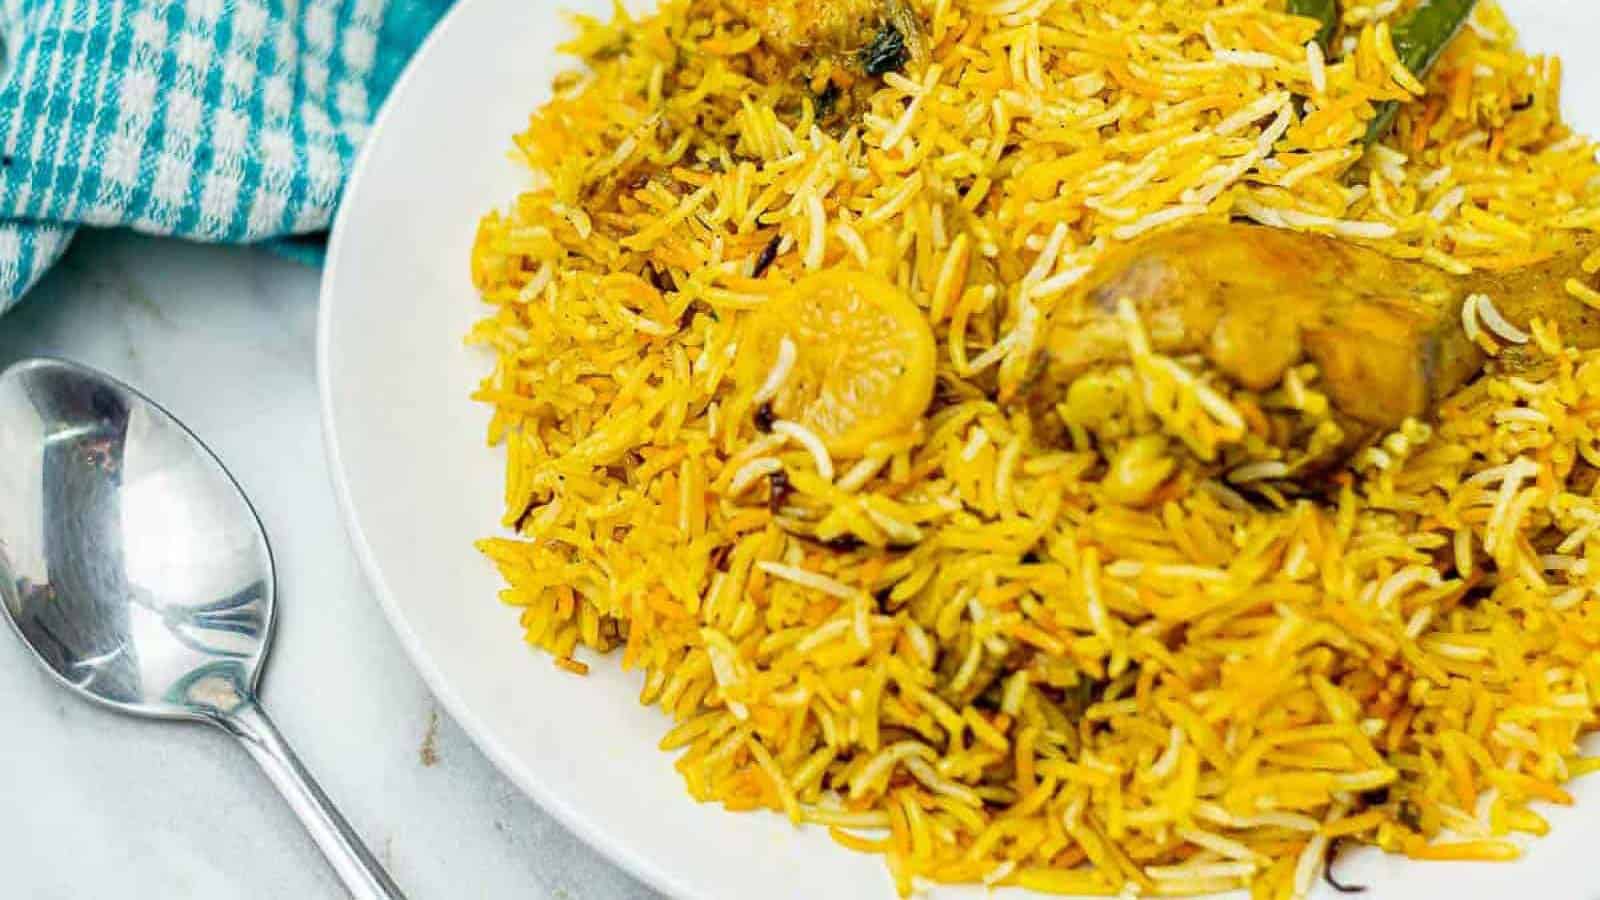 <p>Layering rice, marinated chicken, and aromatic spices produces this all-in-one dish. Biryani is a culinary event that belongs on every home menu.</p><p><strong>Get the Recipe: </strong><a href="https://allwaysdelicious.com/chicken-biryani/?utm_source=msn&utm_medium=page&utm_campaign=Spice so nice: 19 delicious indian recipes to make at home">Chicken Biryani</a></p>